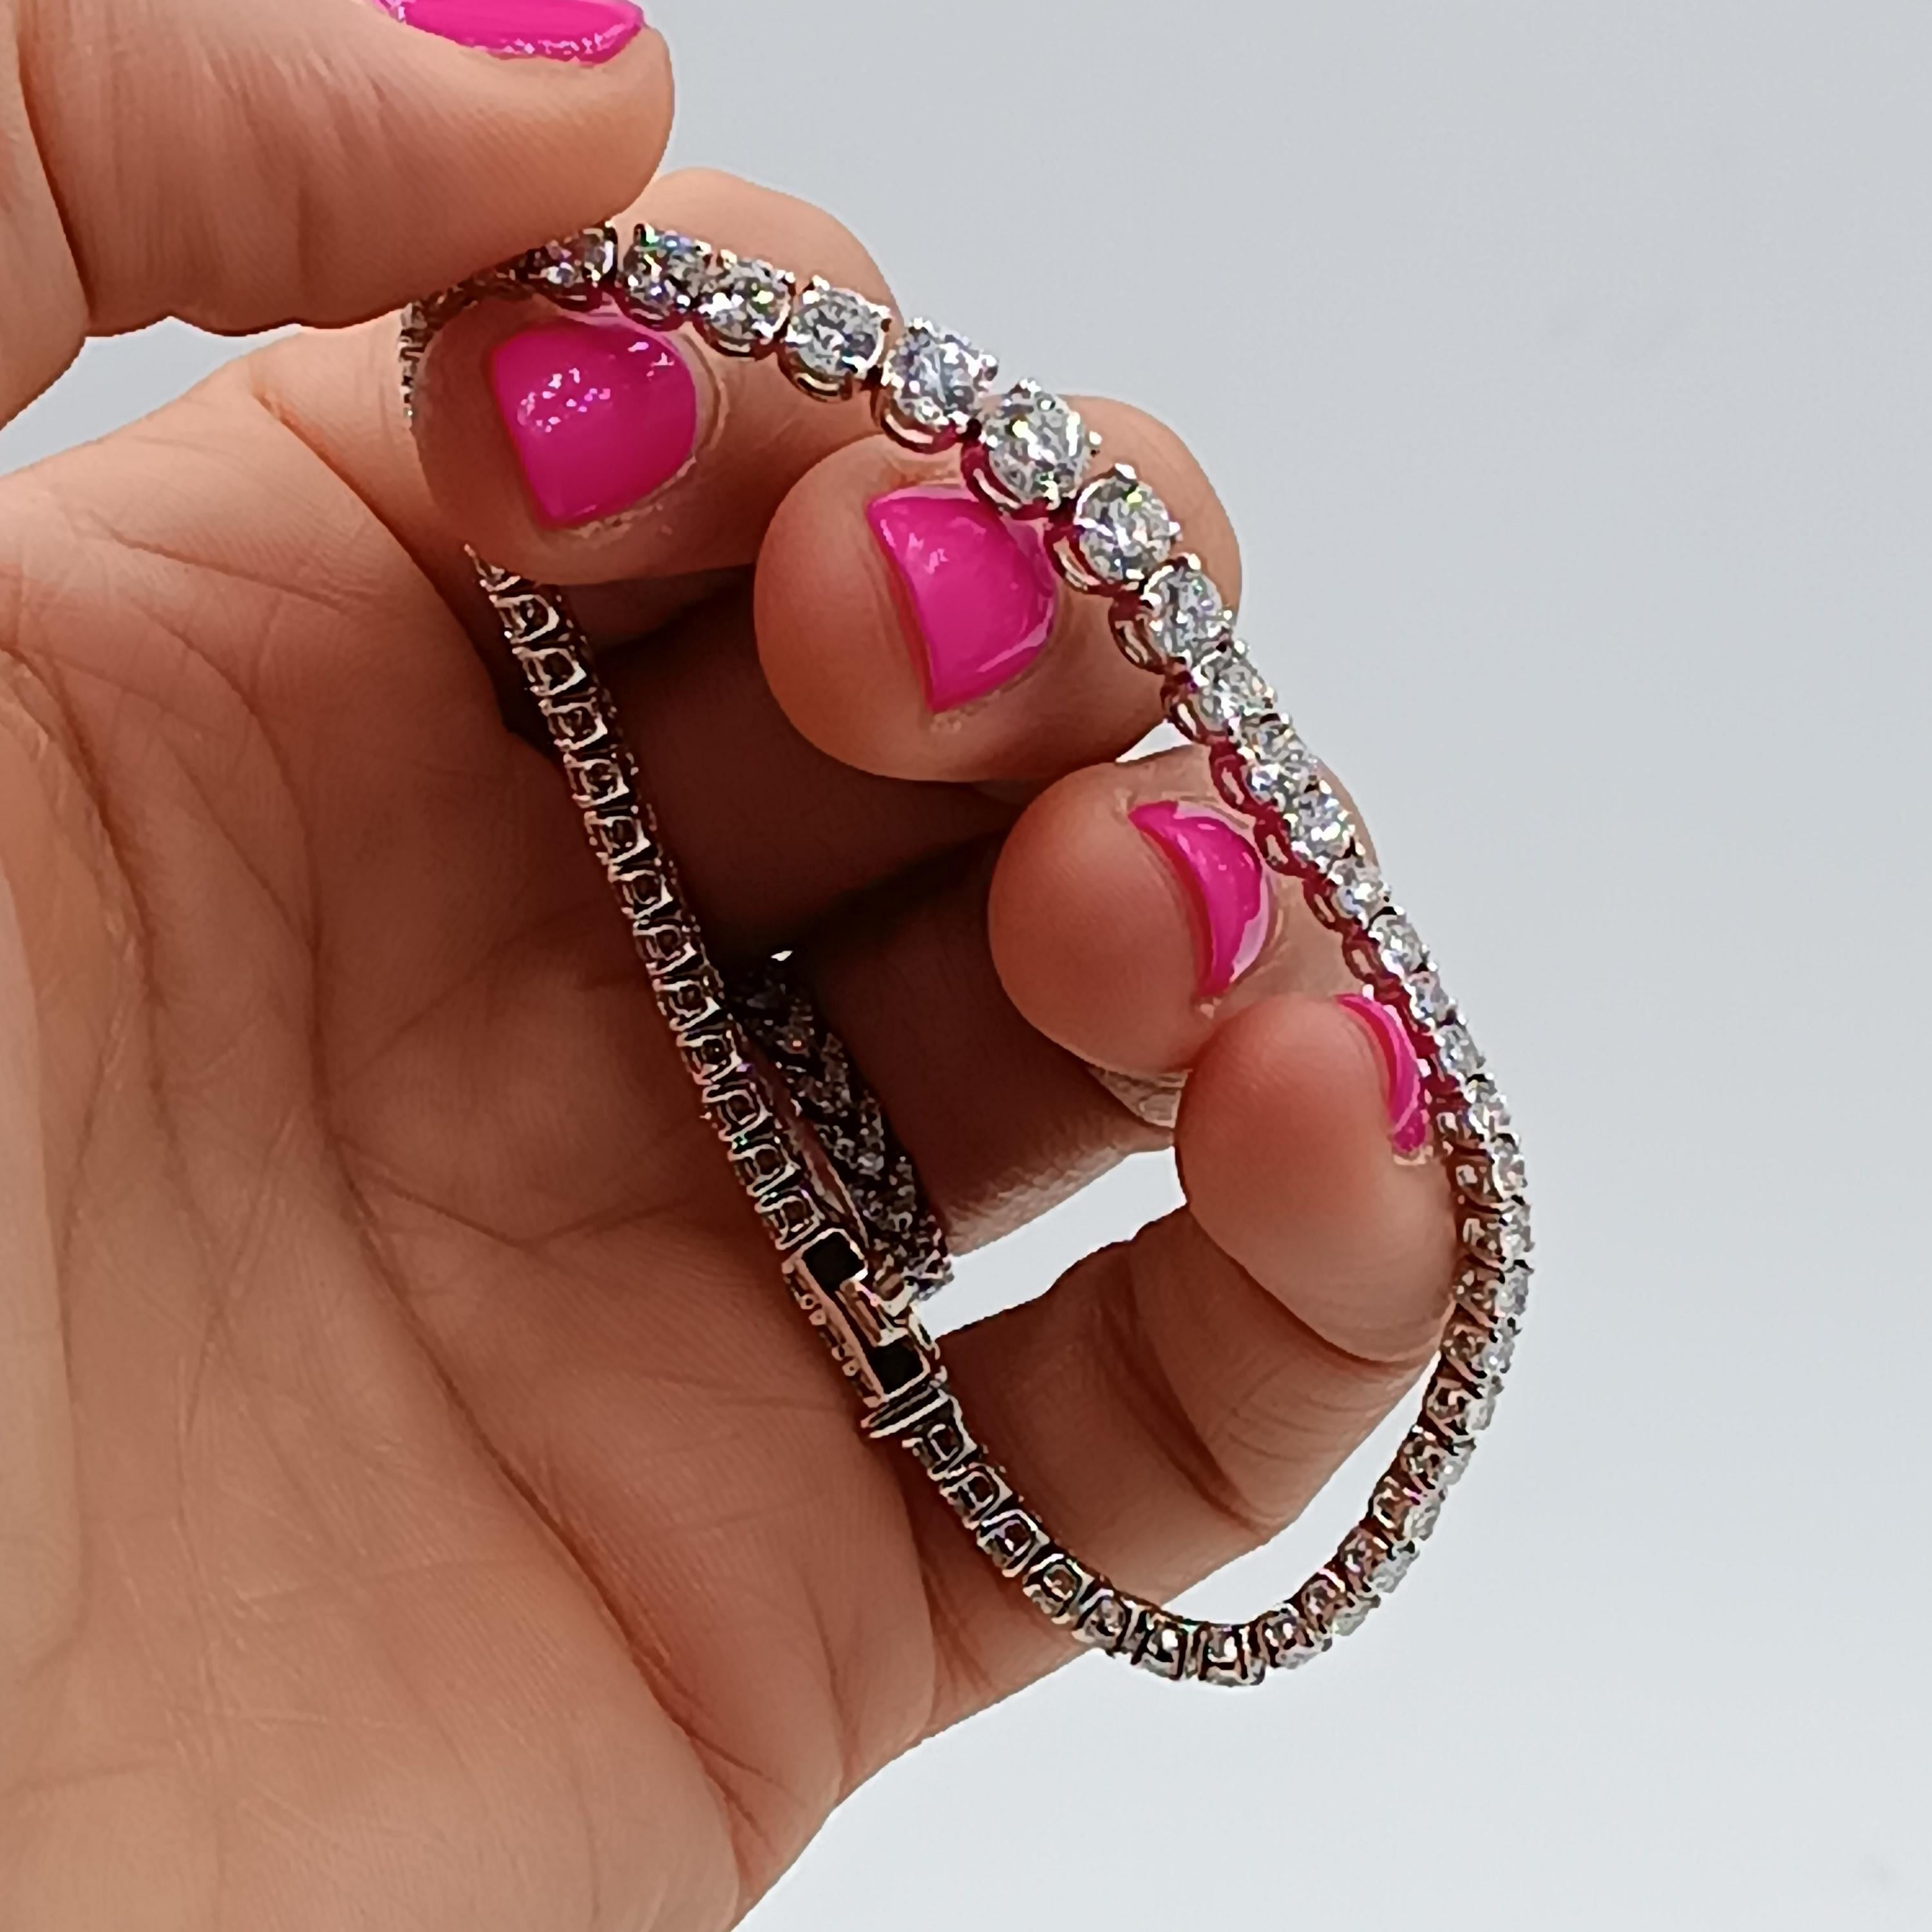 This wonderful 18 carat white gold tennis bracelet boasts 56 VS G color diamonds for a total of 5,35 carats The gold weights is 13.23 grams. the length is 18 cm
A classic masterpiece made in our workshop in Milano.
any item of our jewelry collection